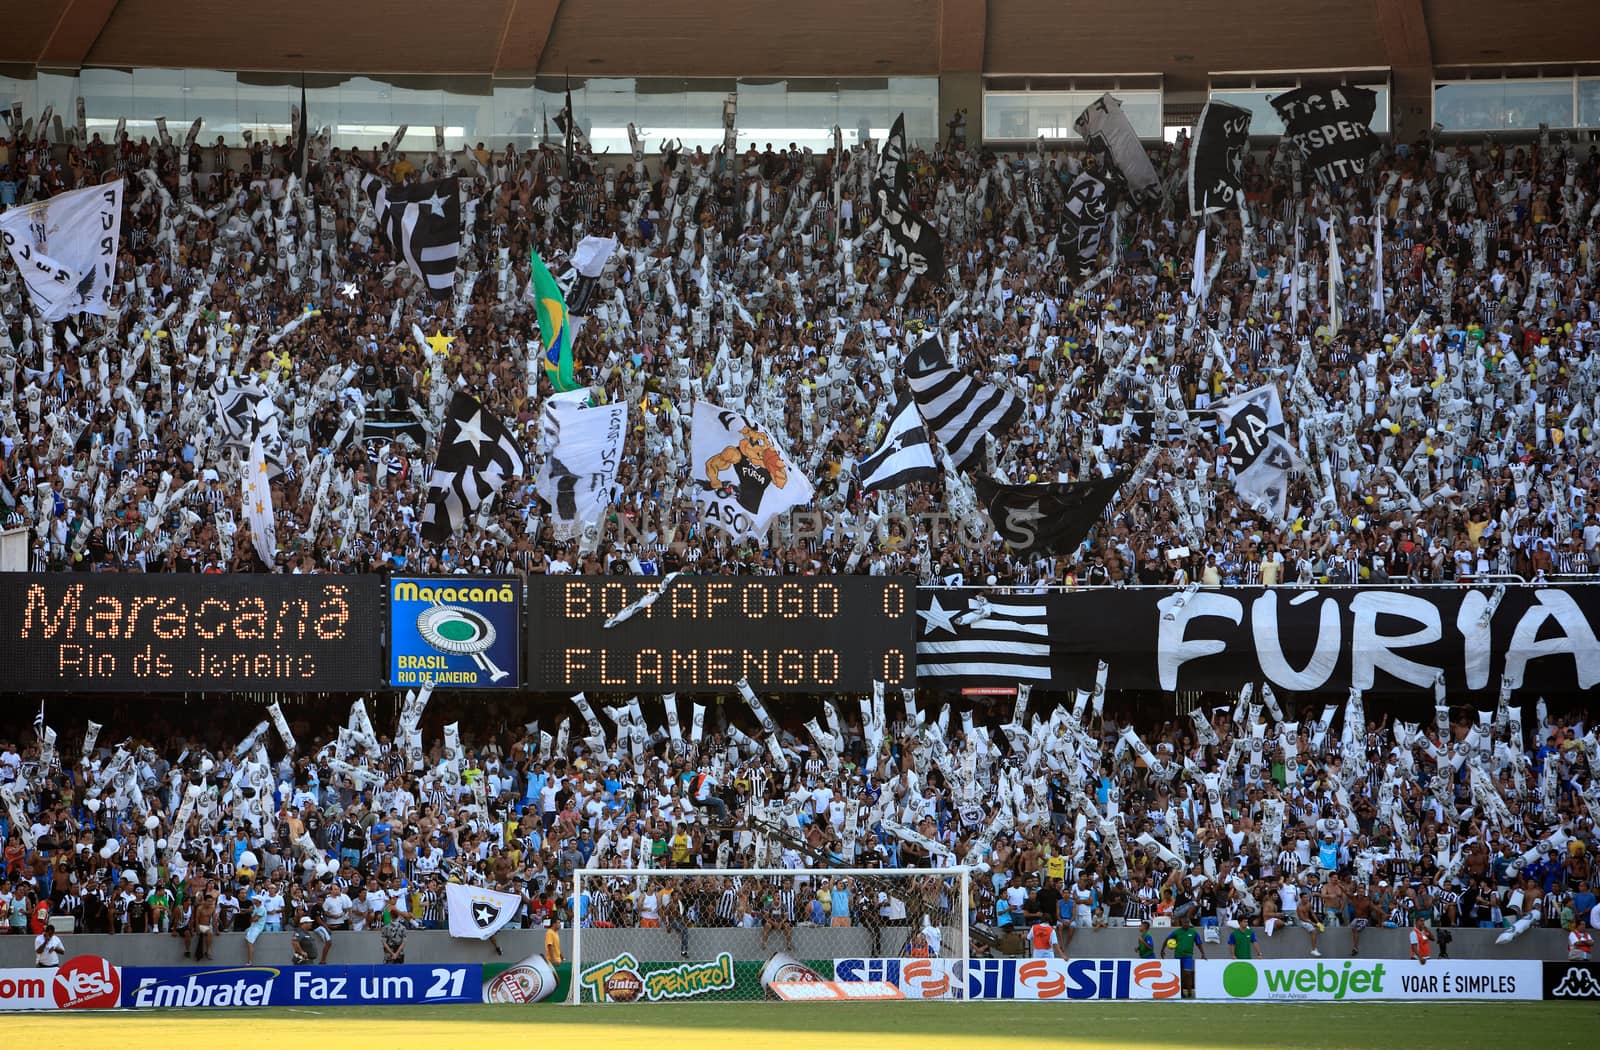 Rio de Janeiro, Brazil - September 13, 2007: Botafogo supporters at the soccer rio state championship 2007 final between Flamengo and Botafogo in the Old Maracana stadium